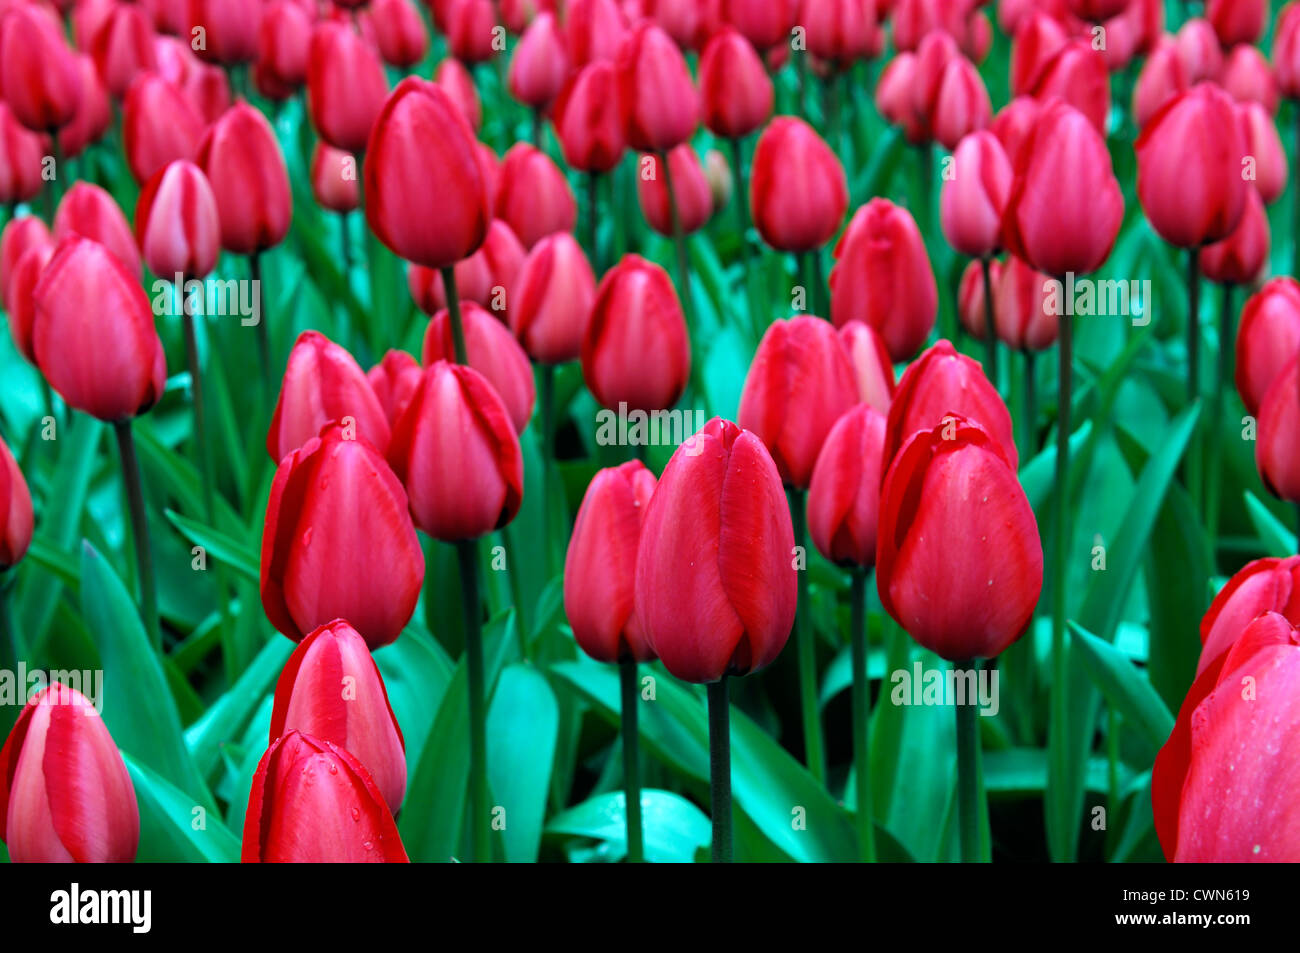 Tulipa red impression darwin hybrid tulip flowers display spring flower bloom blossom bed colour color bulb Stock Photo